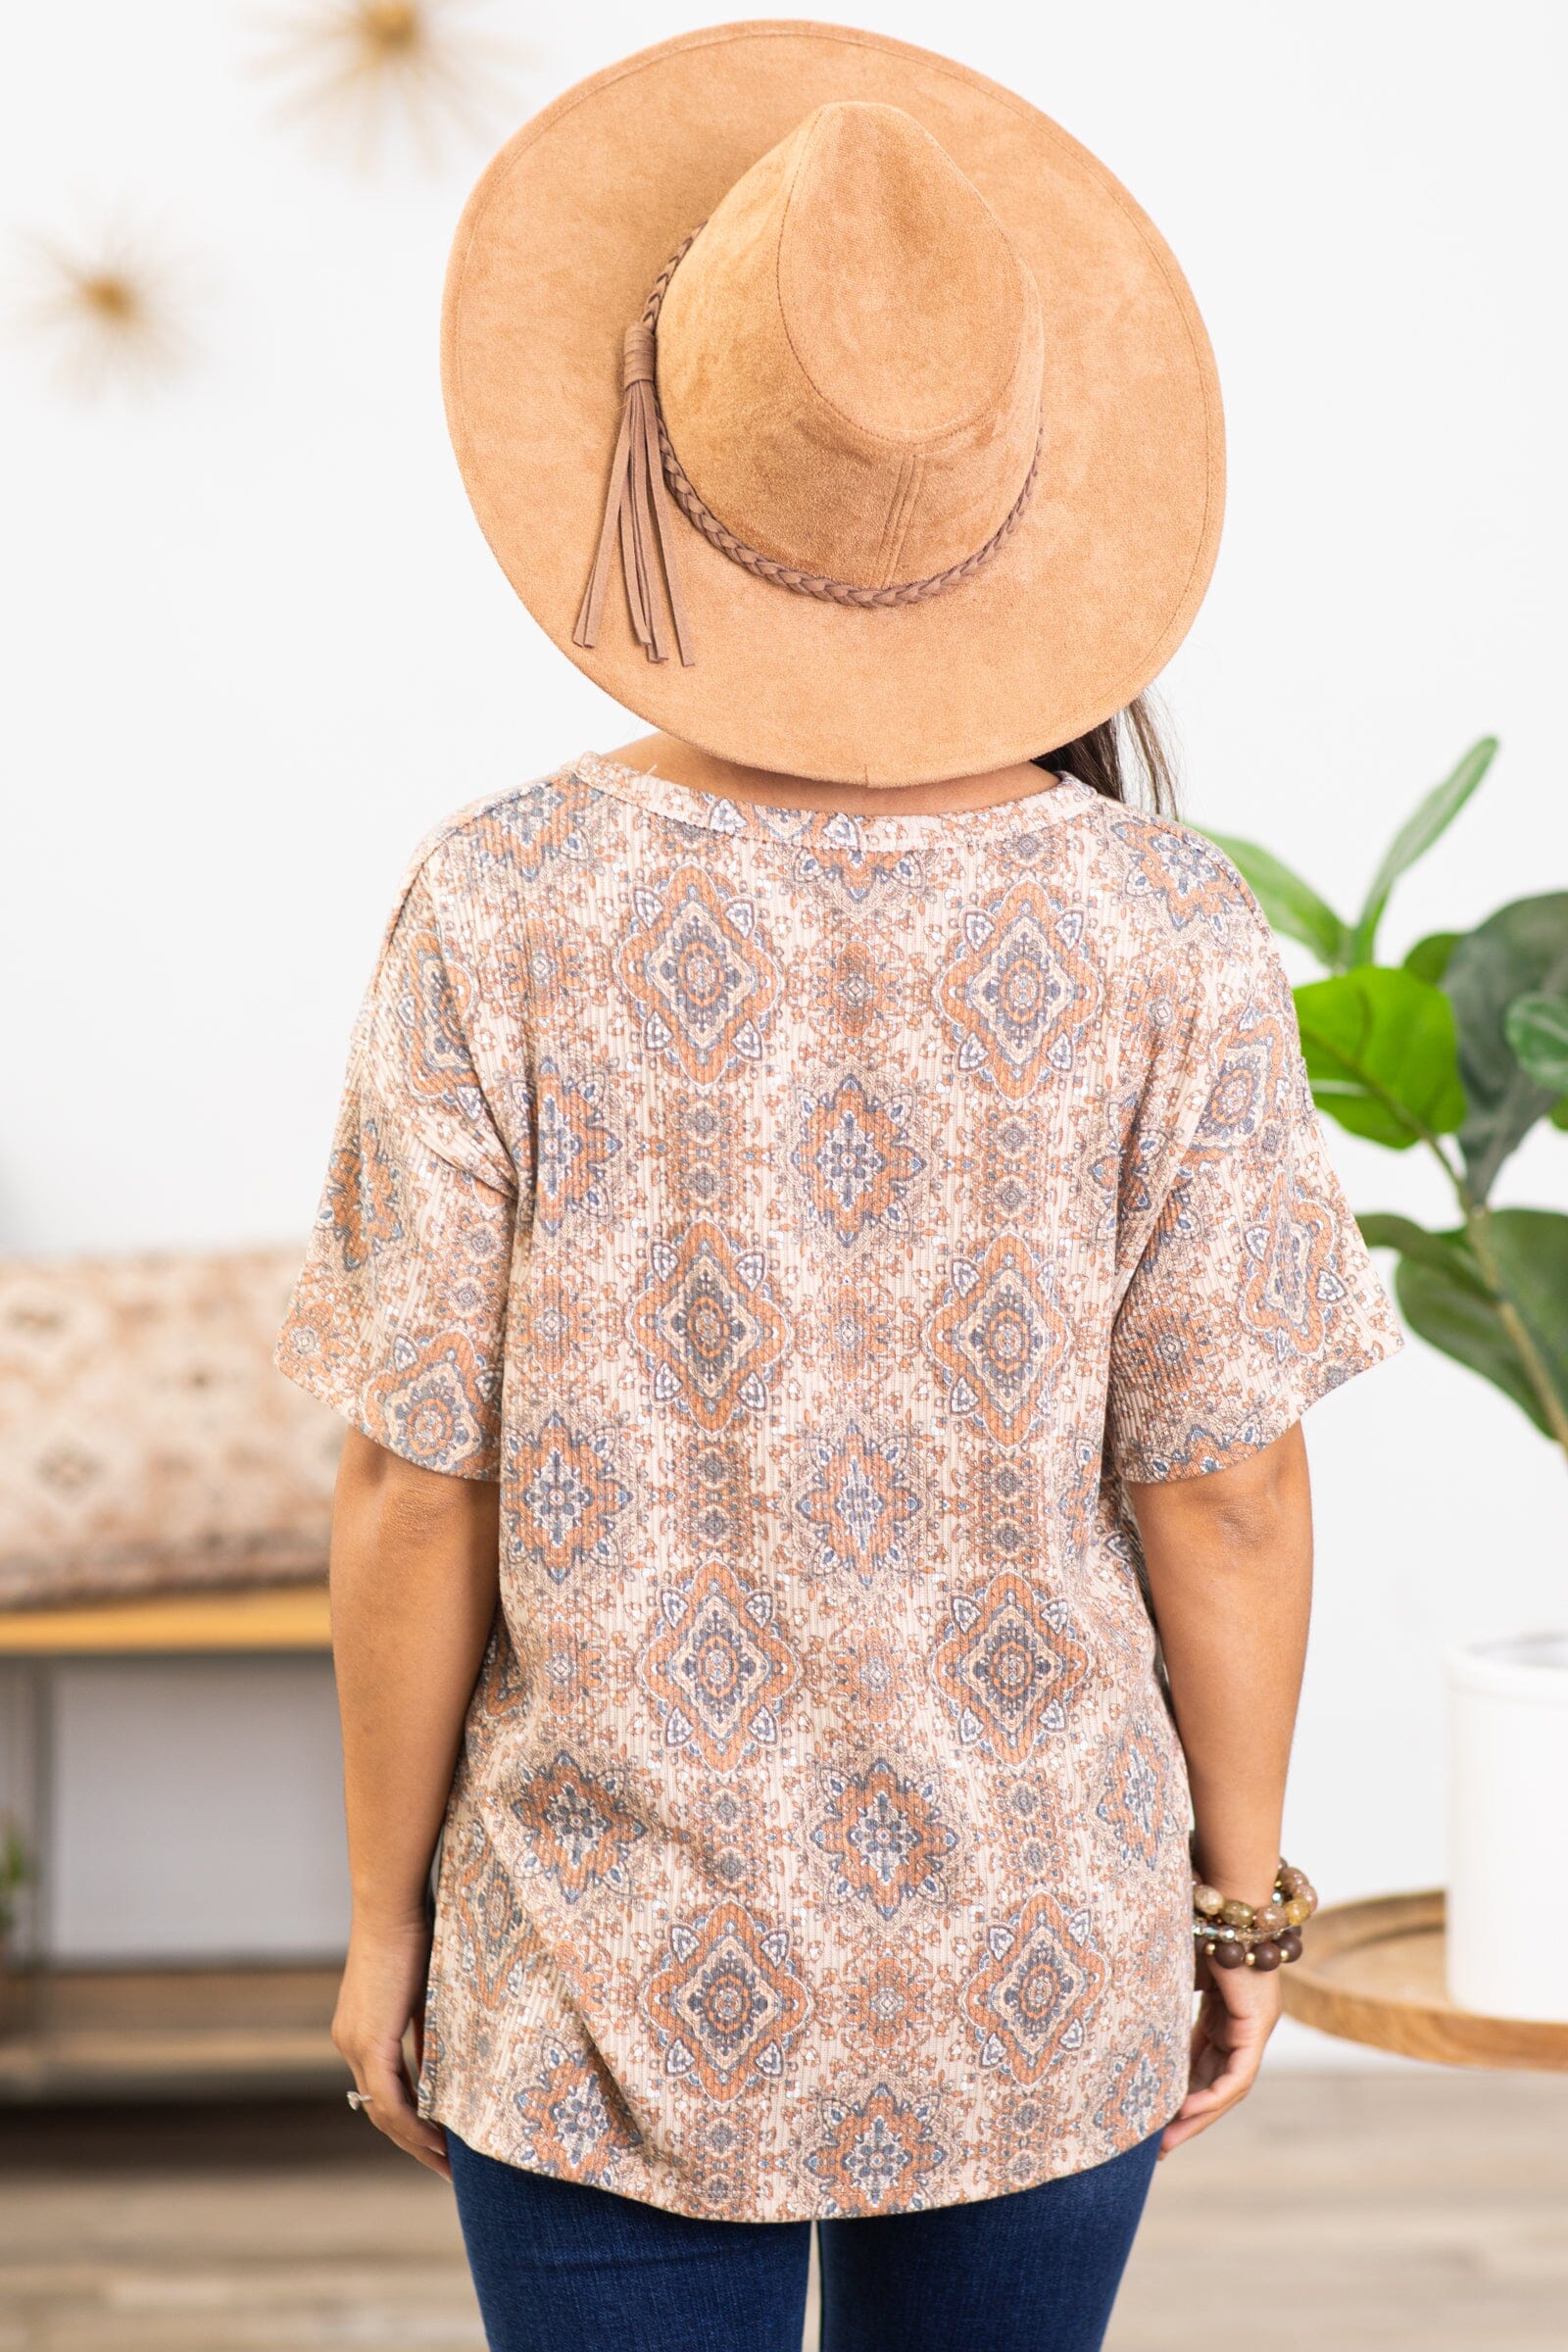 Tan and Peach Medallion Print V-Neck Top - Filly Flair